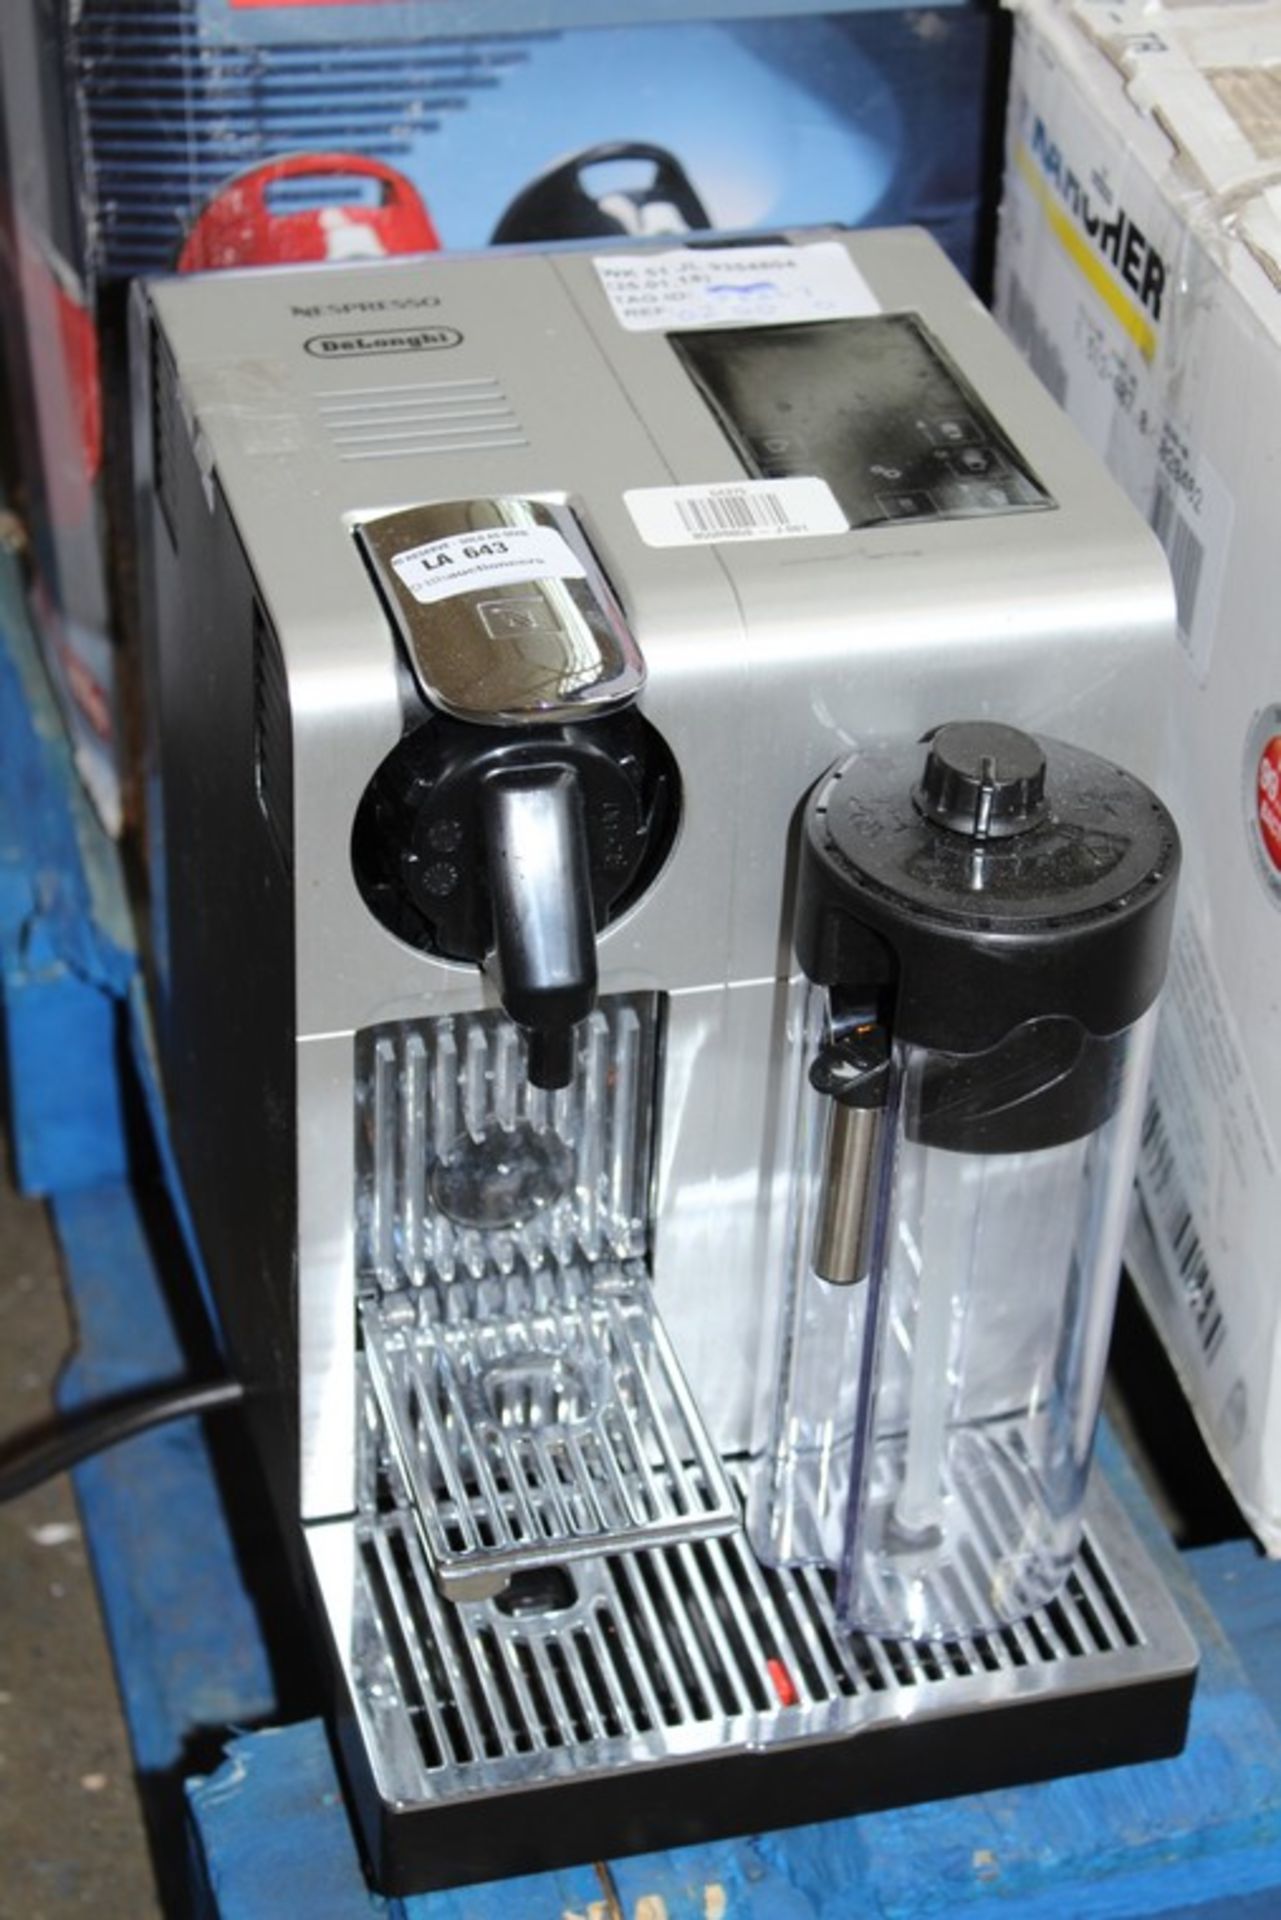 1 x NESPRESSO DELONGHI COFFEE MACHINE RRP £250 (33357) *PLEASE NOTE THAT THE BID PRICE IS MULTIPLIED